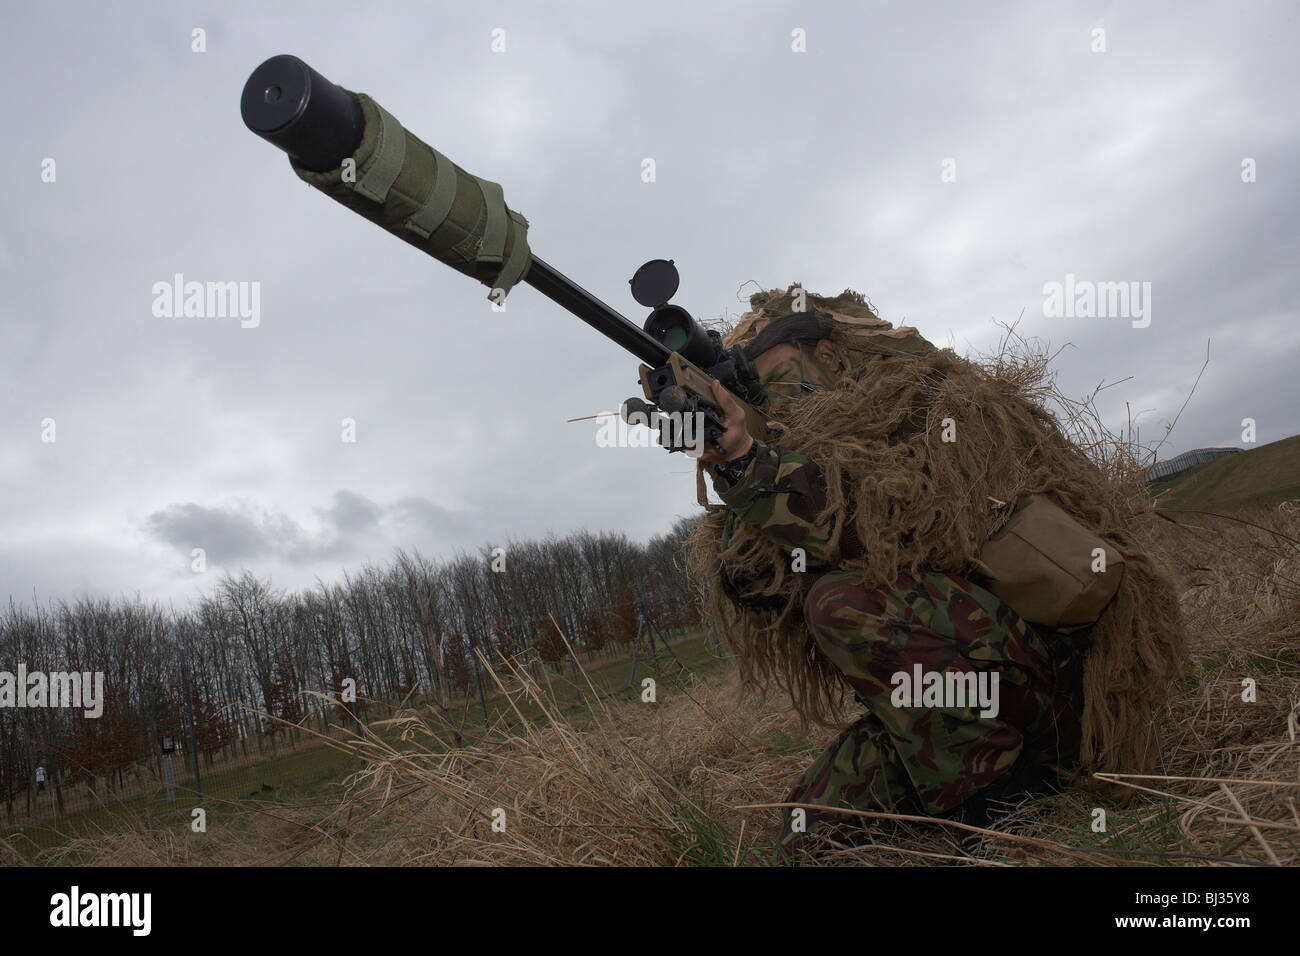 A camouflaged British infantry soldier is seen looking down the telescopic sight of a L115A3 sniper rifle. Stock Photo